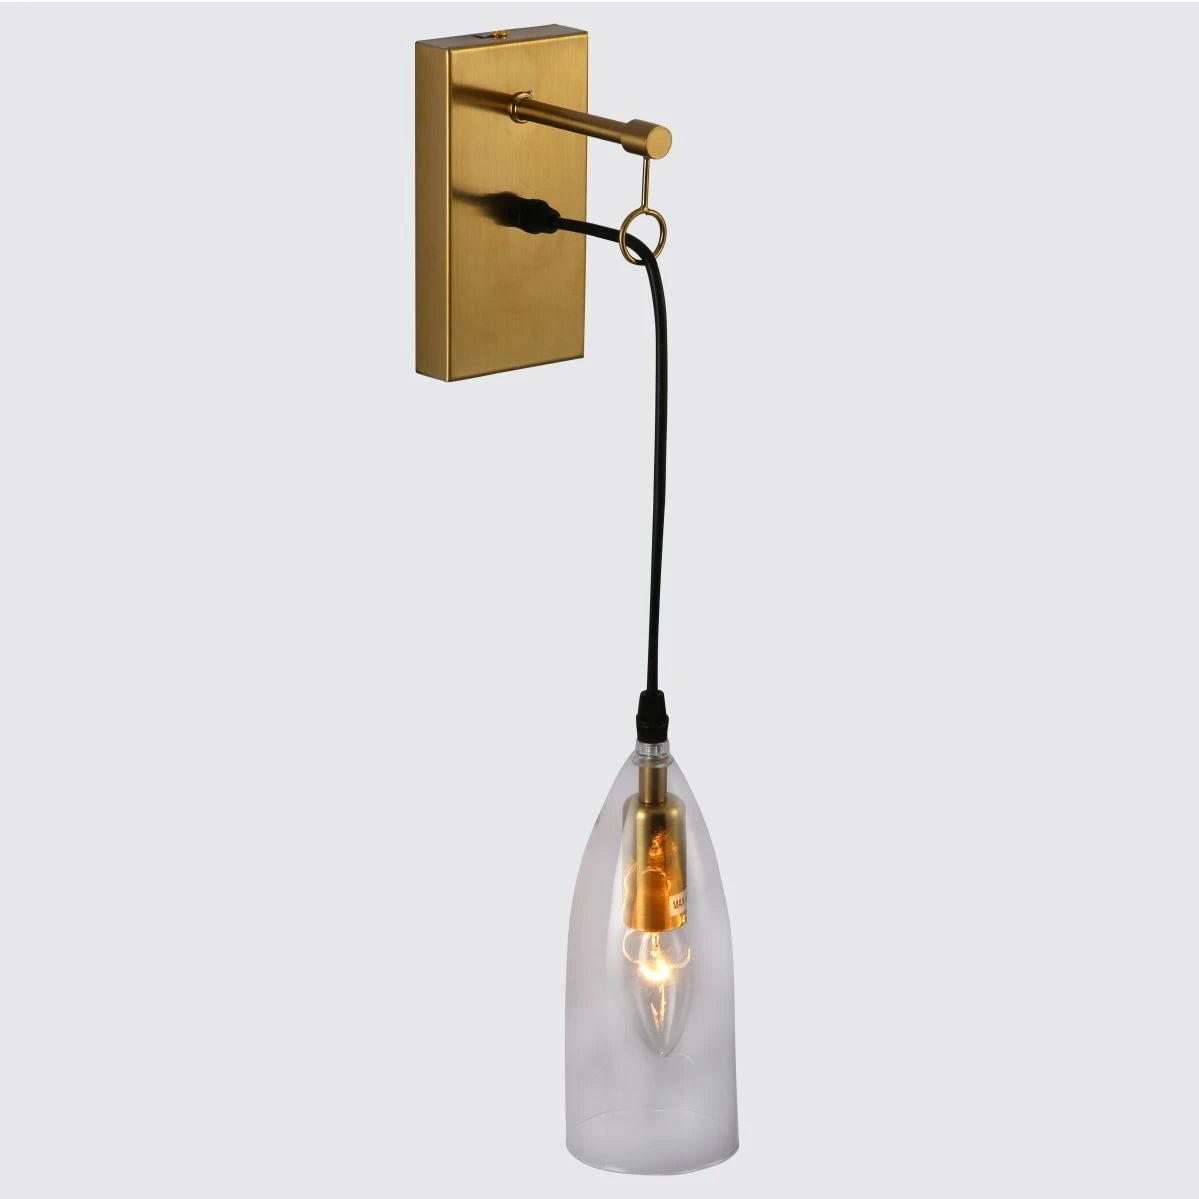 Main image of Snowdrop Clear Glass Gold Metal Pendant Wall Light with E14 Fitting | TEKLED 151-19734